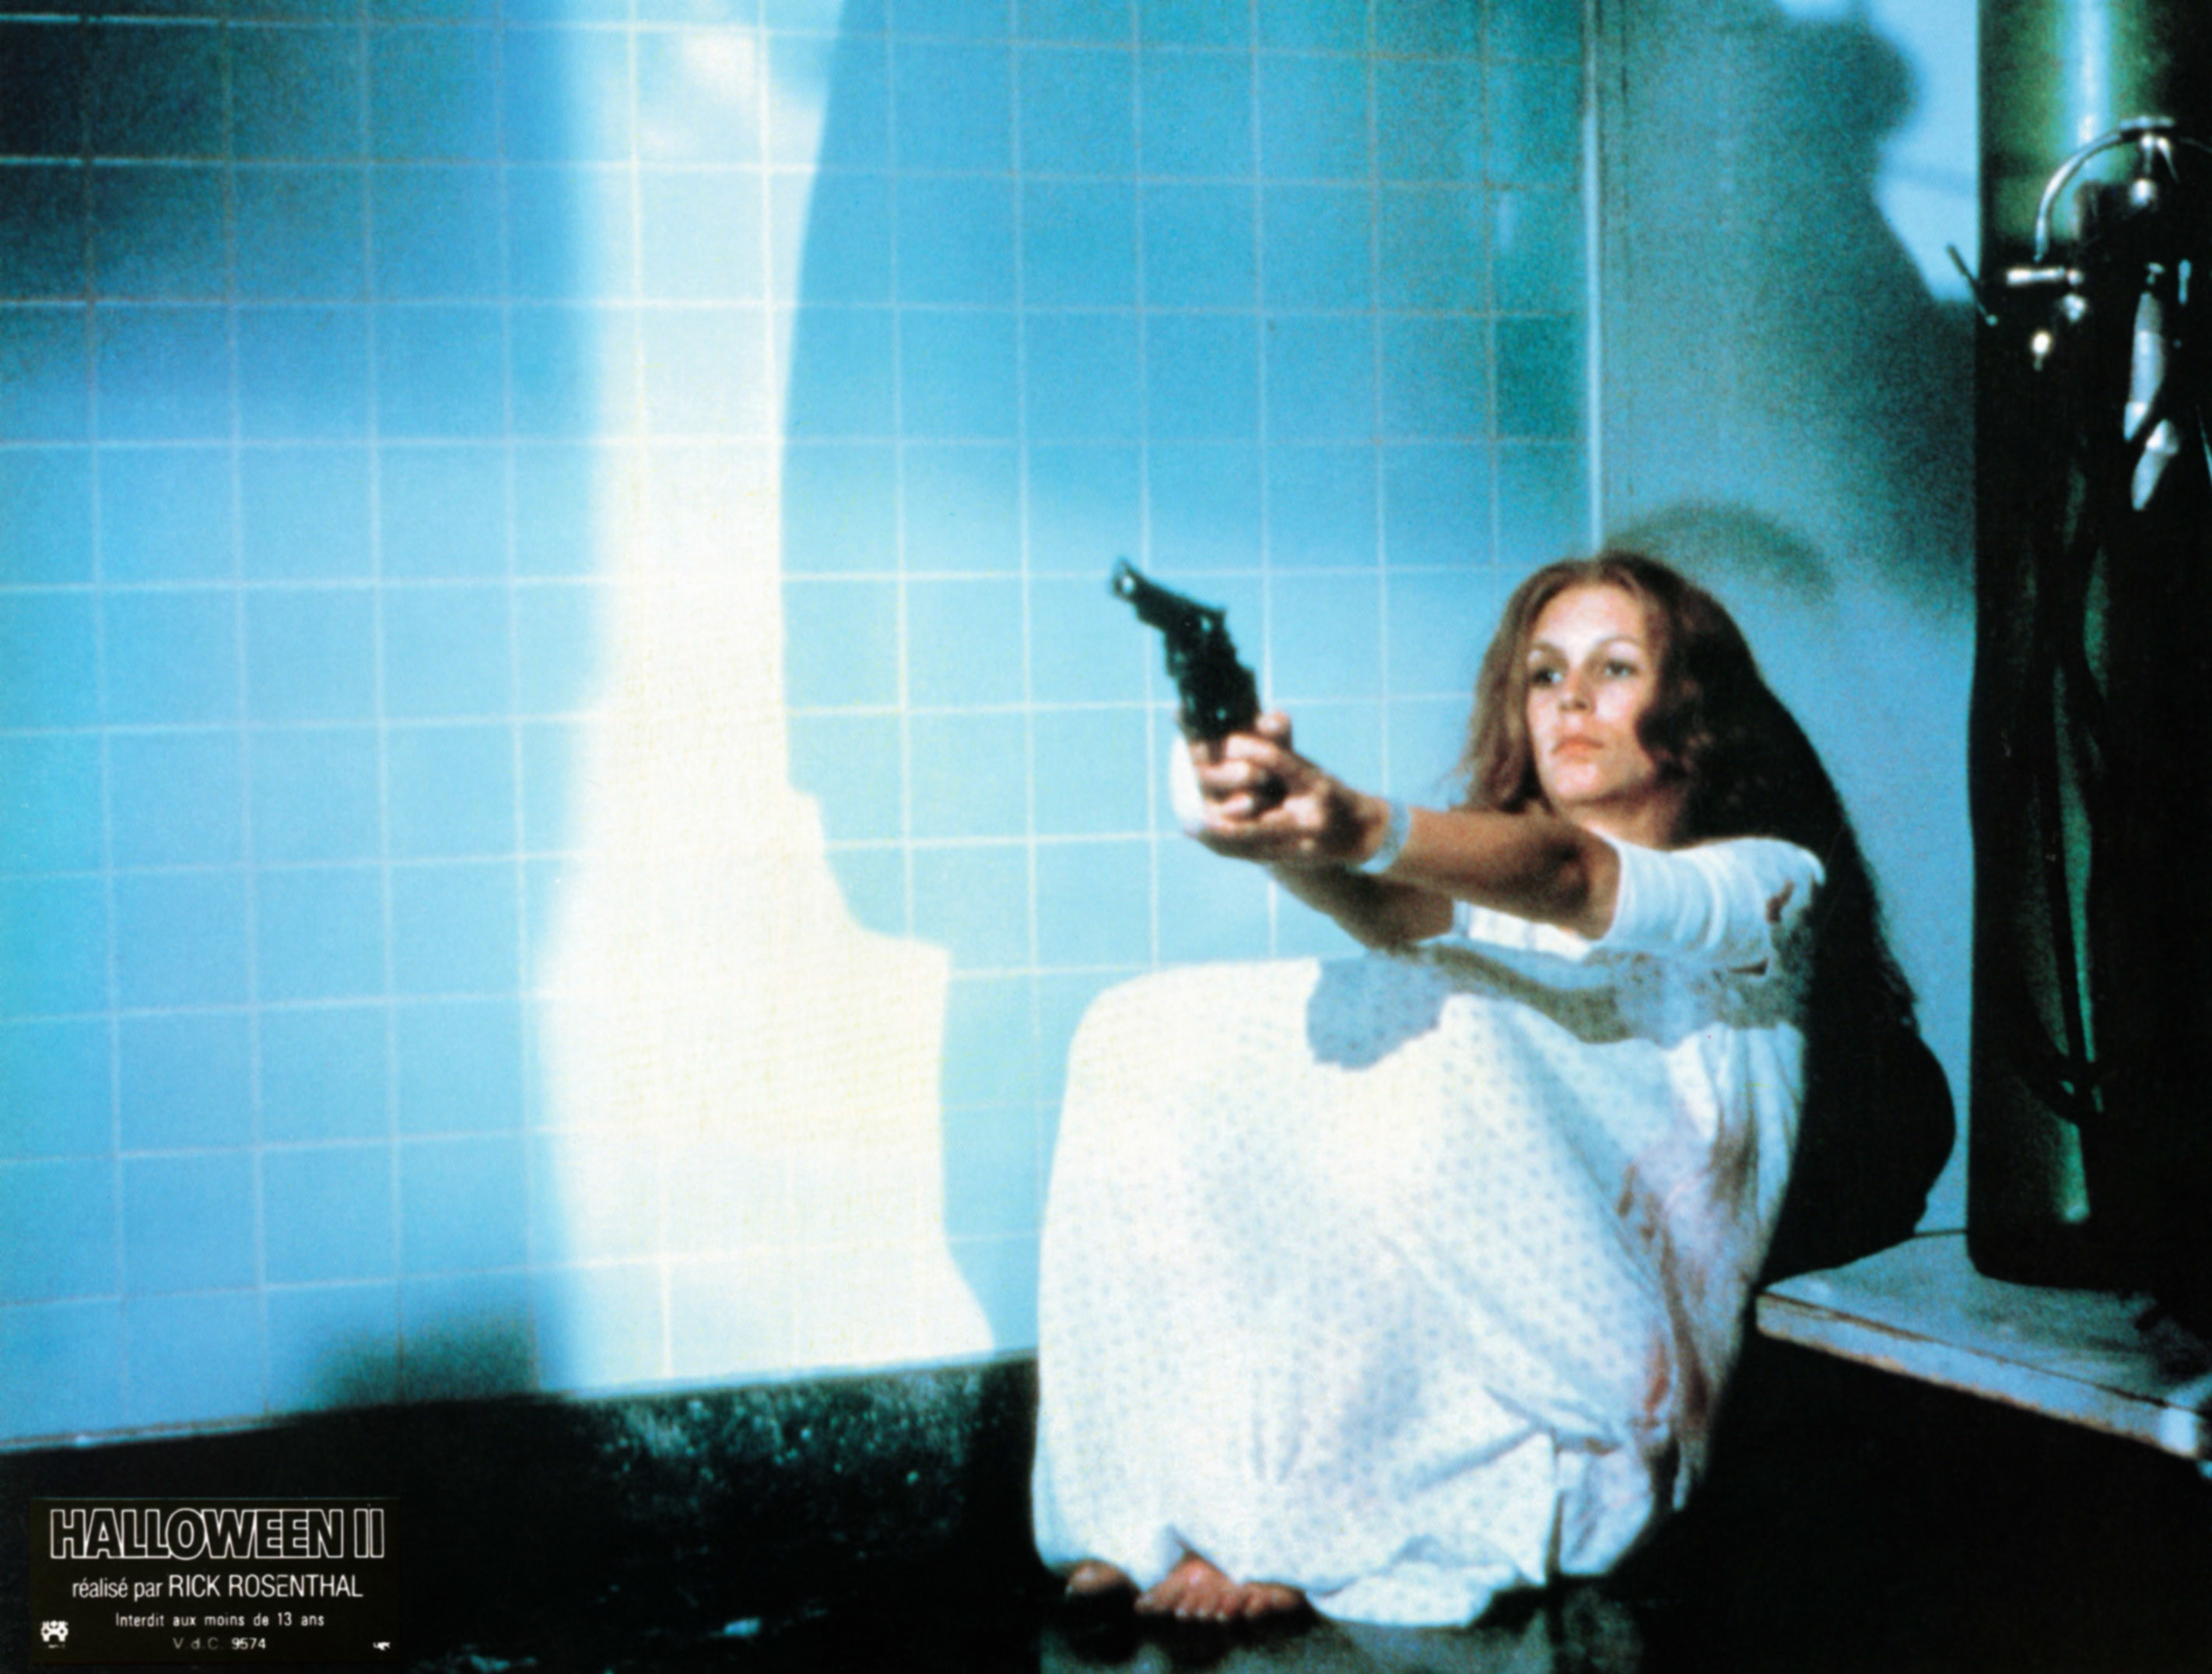 Laurie in a hospital gown pointing a gun